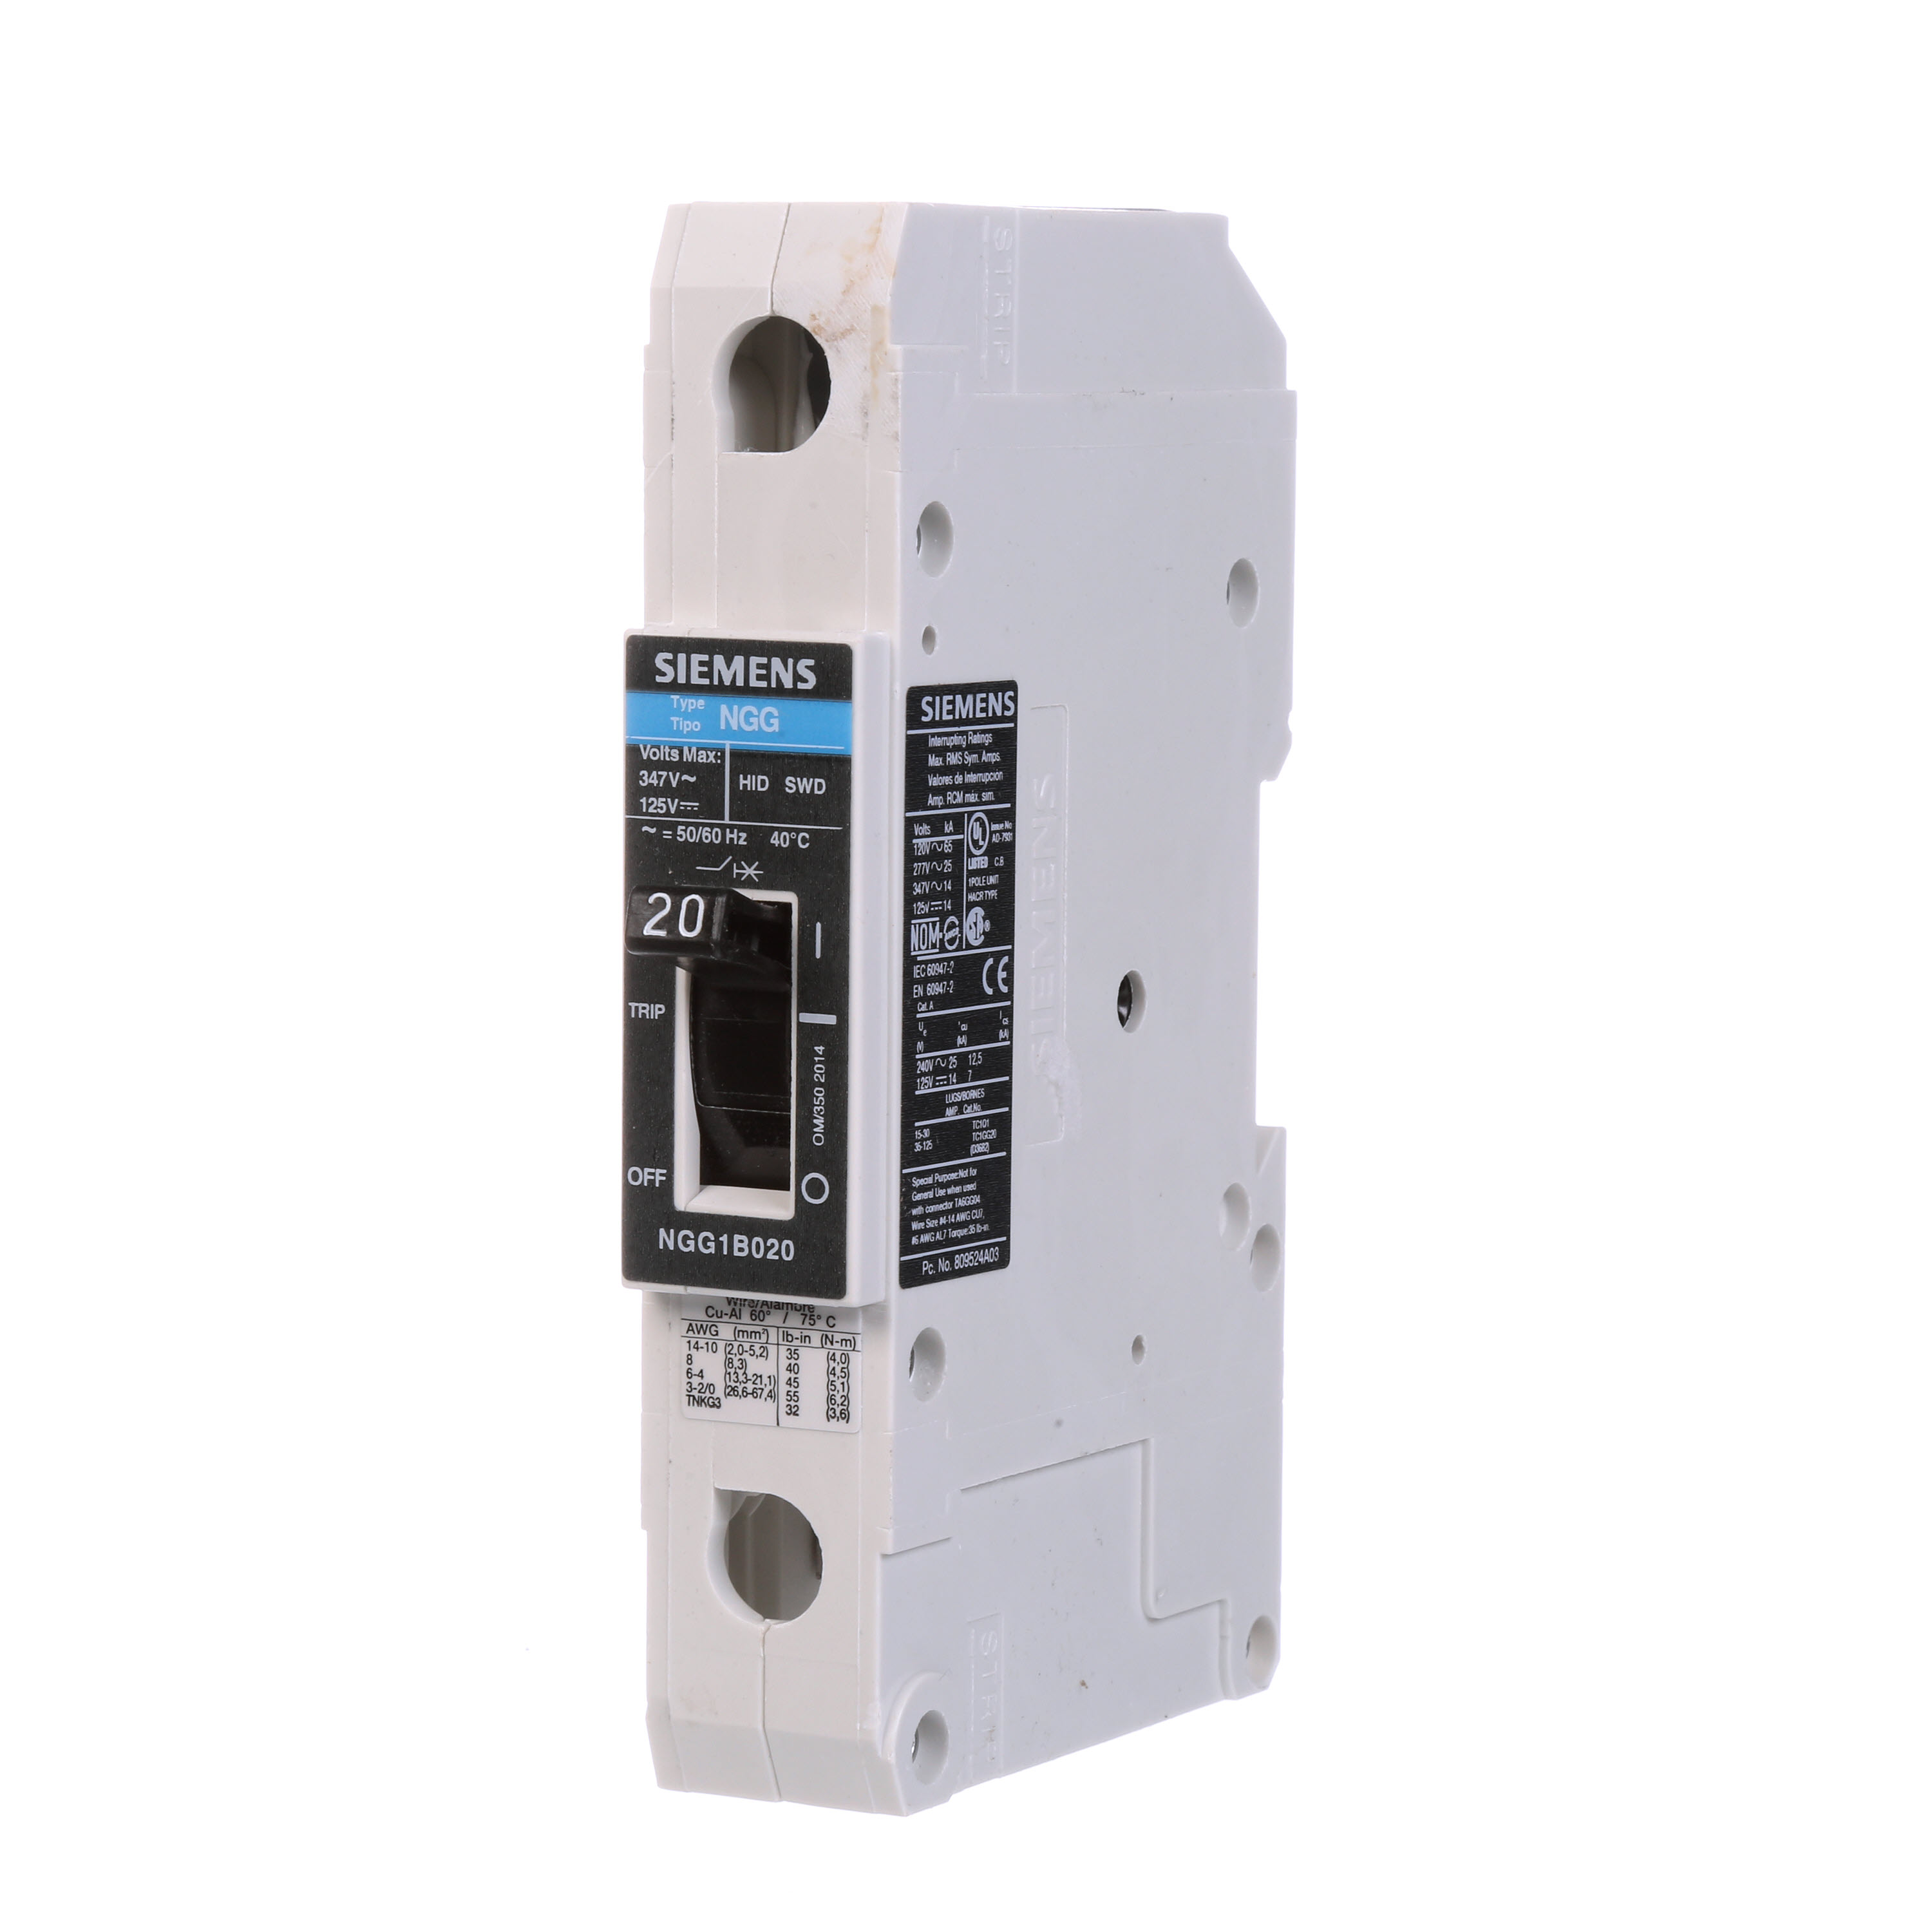 SIEMENS LOW VOLTAGE G FRAME CIRCUIT BREAKER WITH THERMAL - MAGNETIC TRIP. UL LISTED NGG FRAME WITH STANDARD BREAKING CAPACITY. 20A 1-POLE (14KAIC AT 347V) (25KAIC AT 277V). SPECIAL FEATURES MOUNTS ON DIN RAIL / SCREW, LINE AND LOAD SIDE LUGS (TC1Q1) WIRE RANGE 14 - 10 AWS (CU/AL). DIMENSIONS (W x H x D) IN 1 x 5.4 x 2.8.